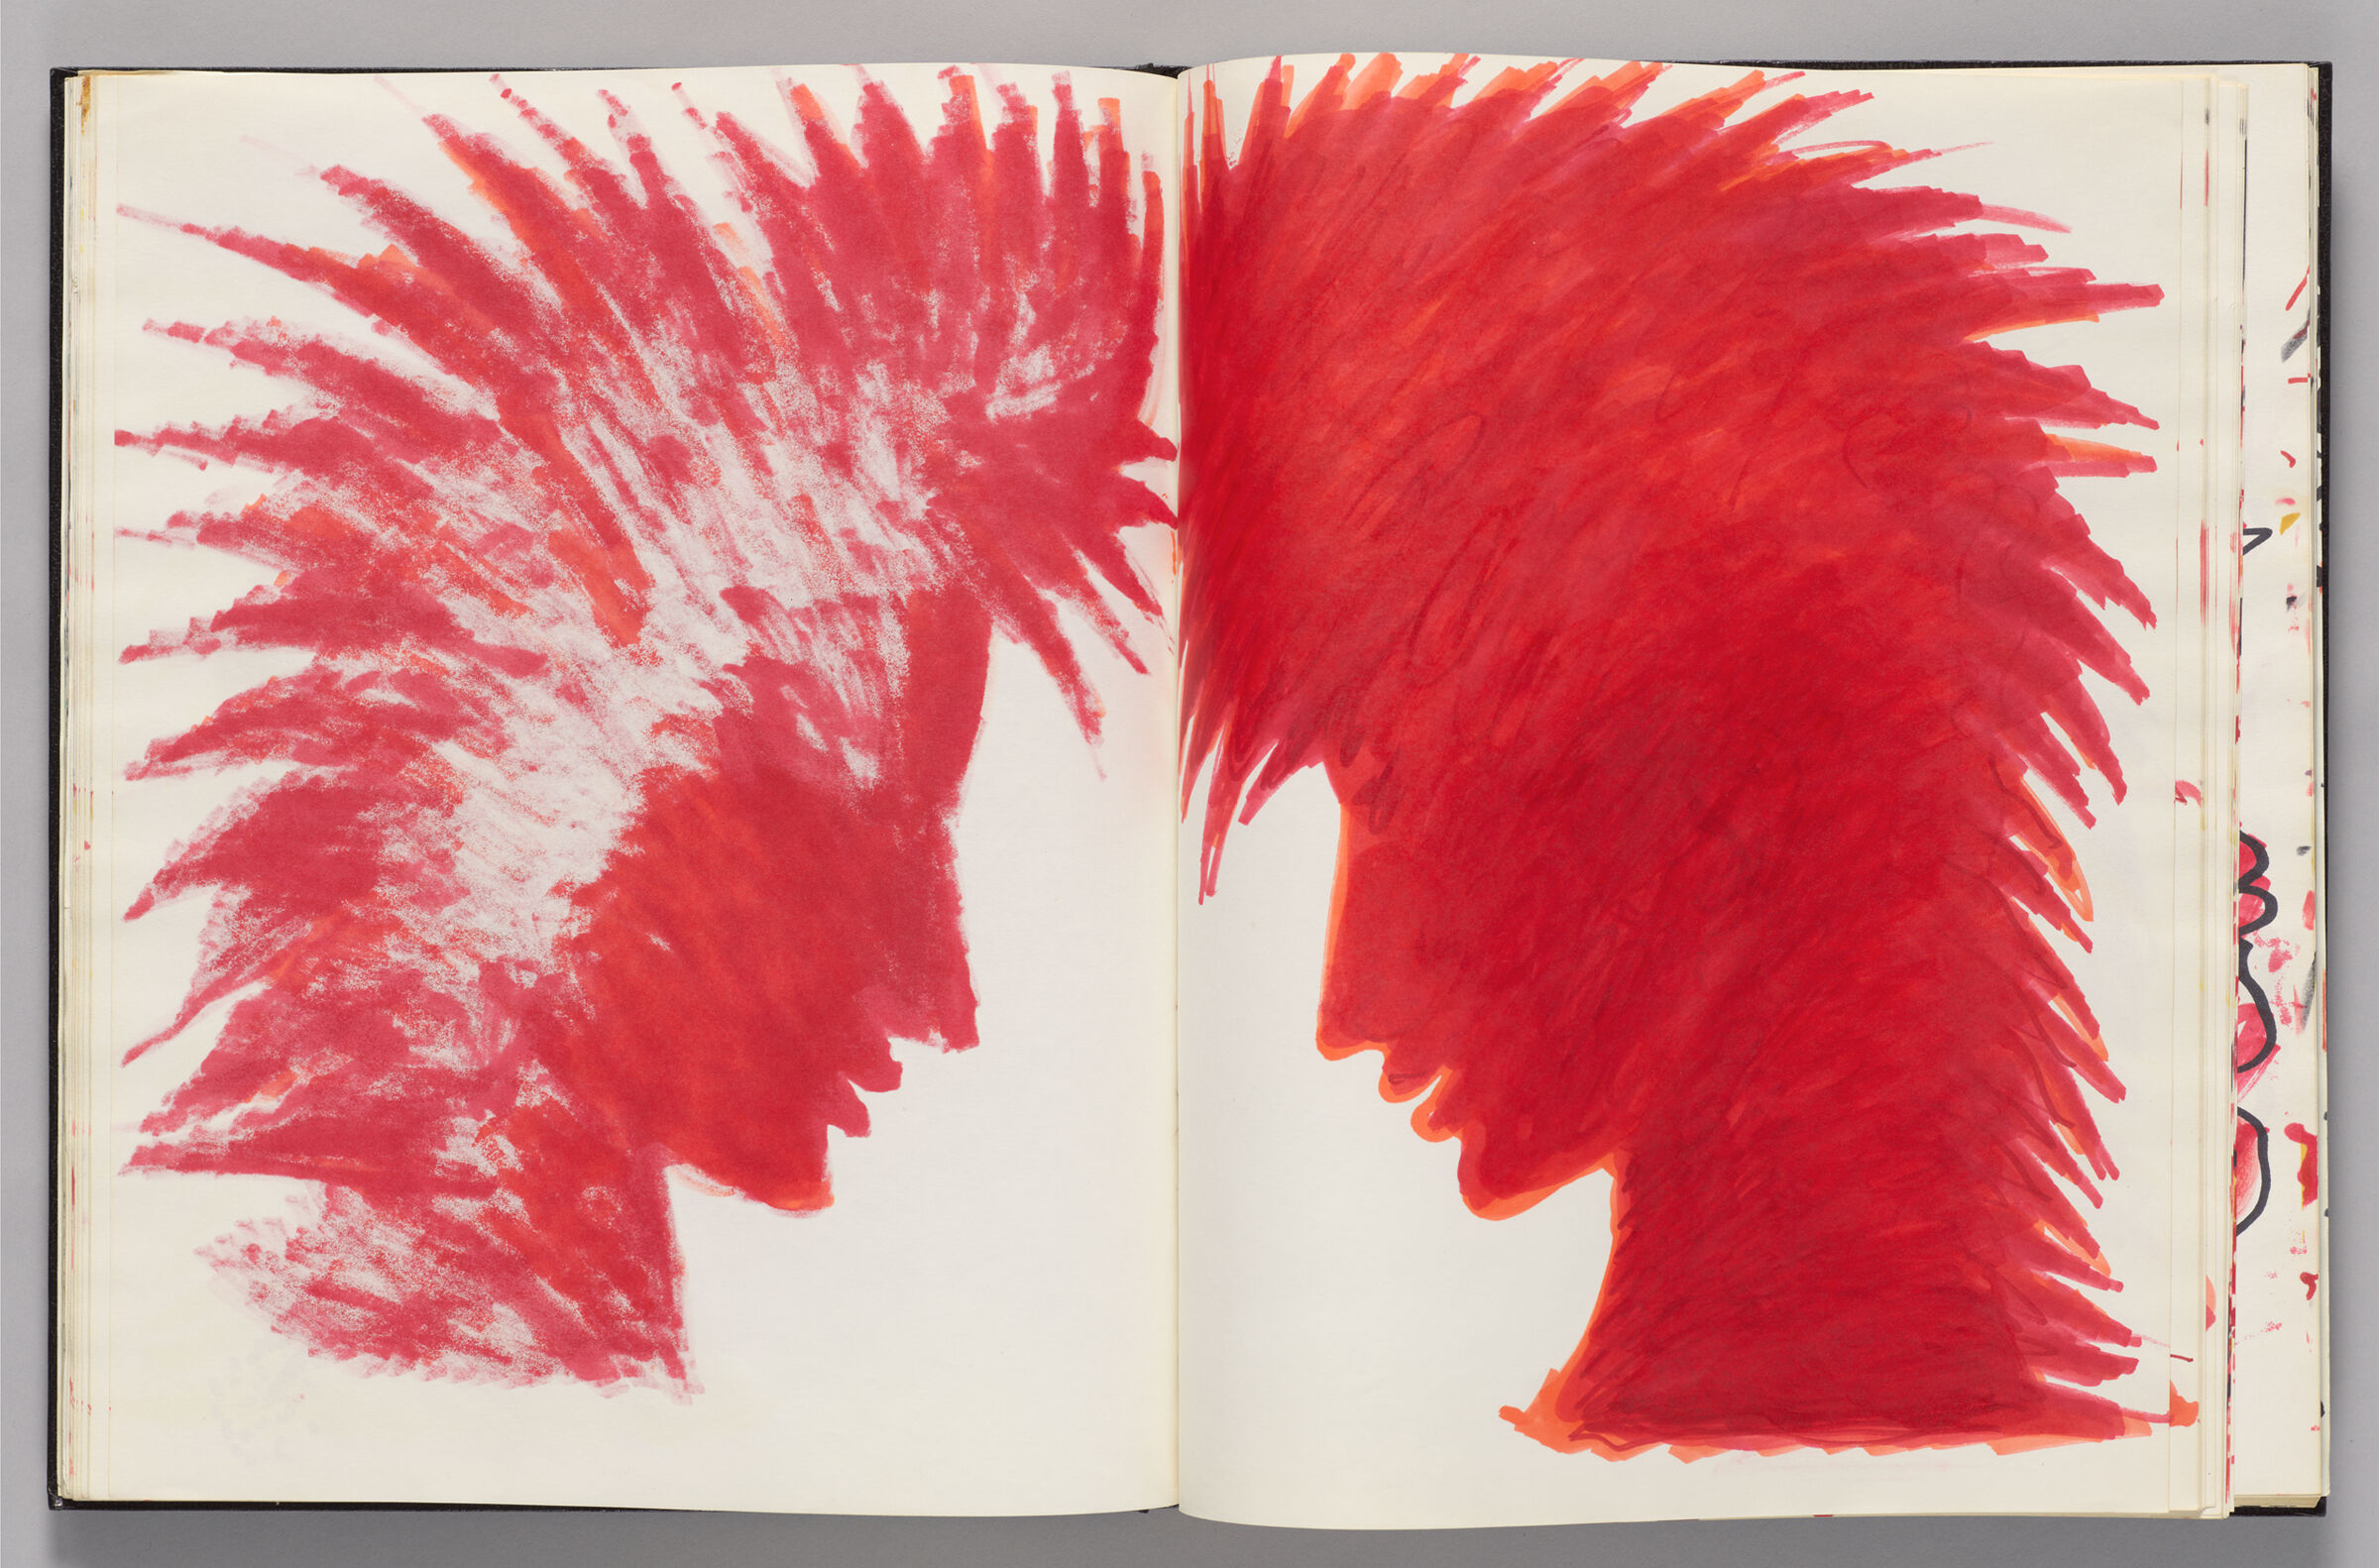 Untitled (Bleed-Through Of Previous Page, Left Page); Untitled (Head In Profile With Spiky Hair, Right Page)